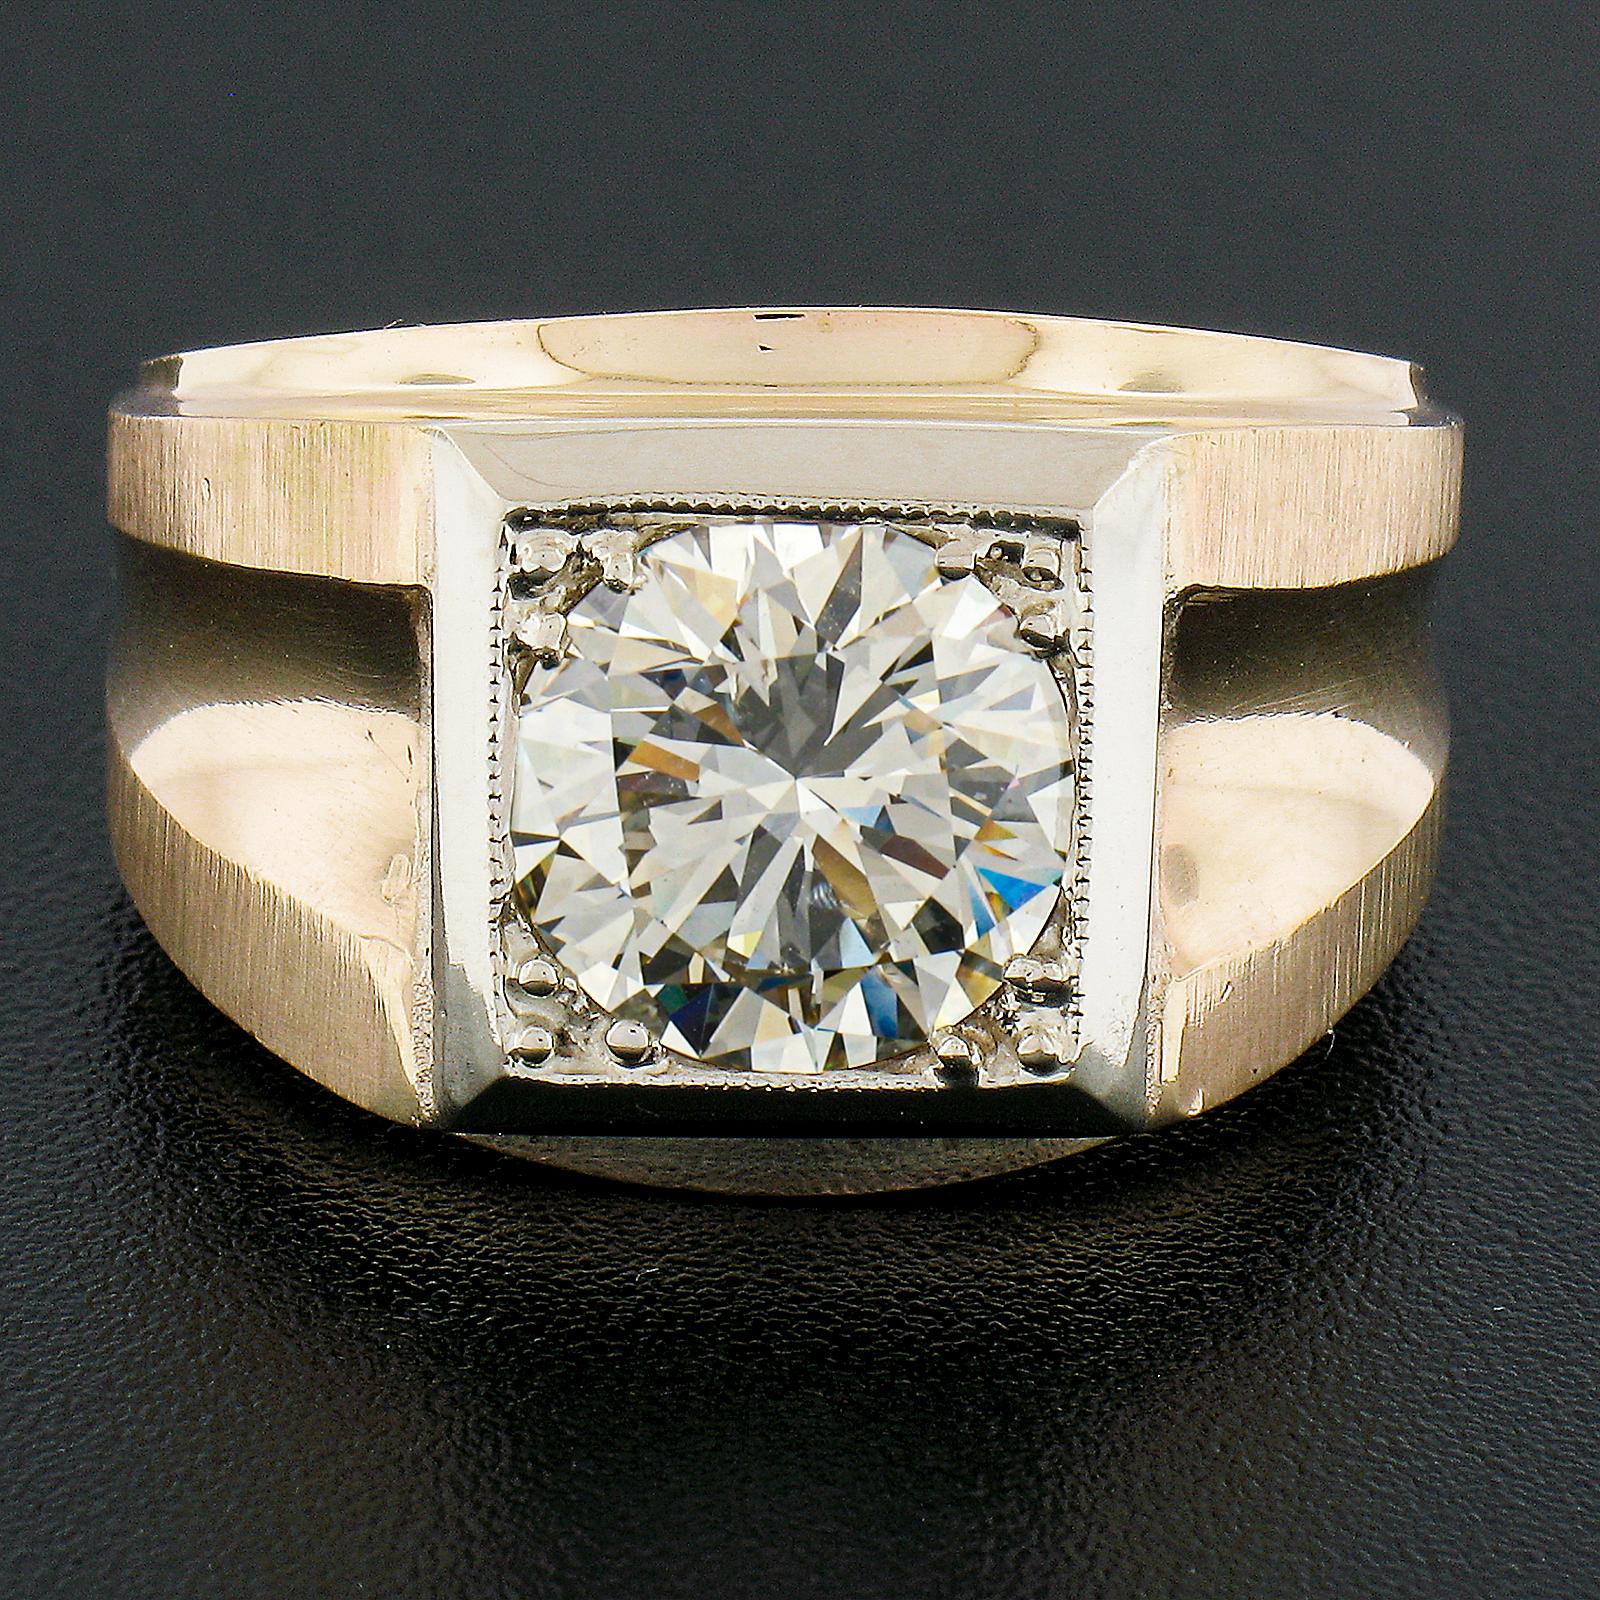 Men's 3.15ct GIA Round Brilliant Cut Diamond Solitaire Dual Finish 14k Gold Ring In Excellent Condition For Sale In Montclair, NJ